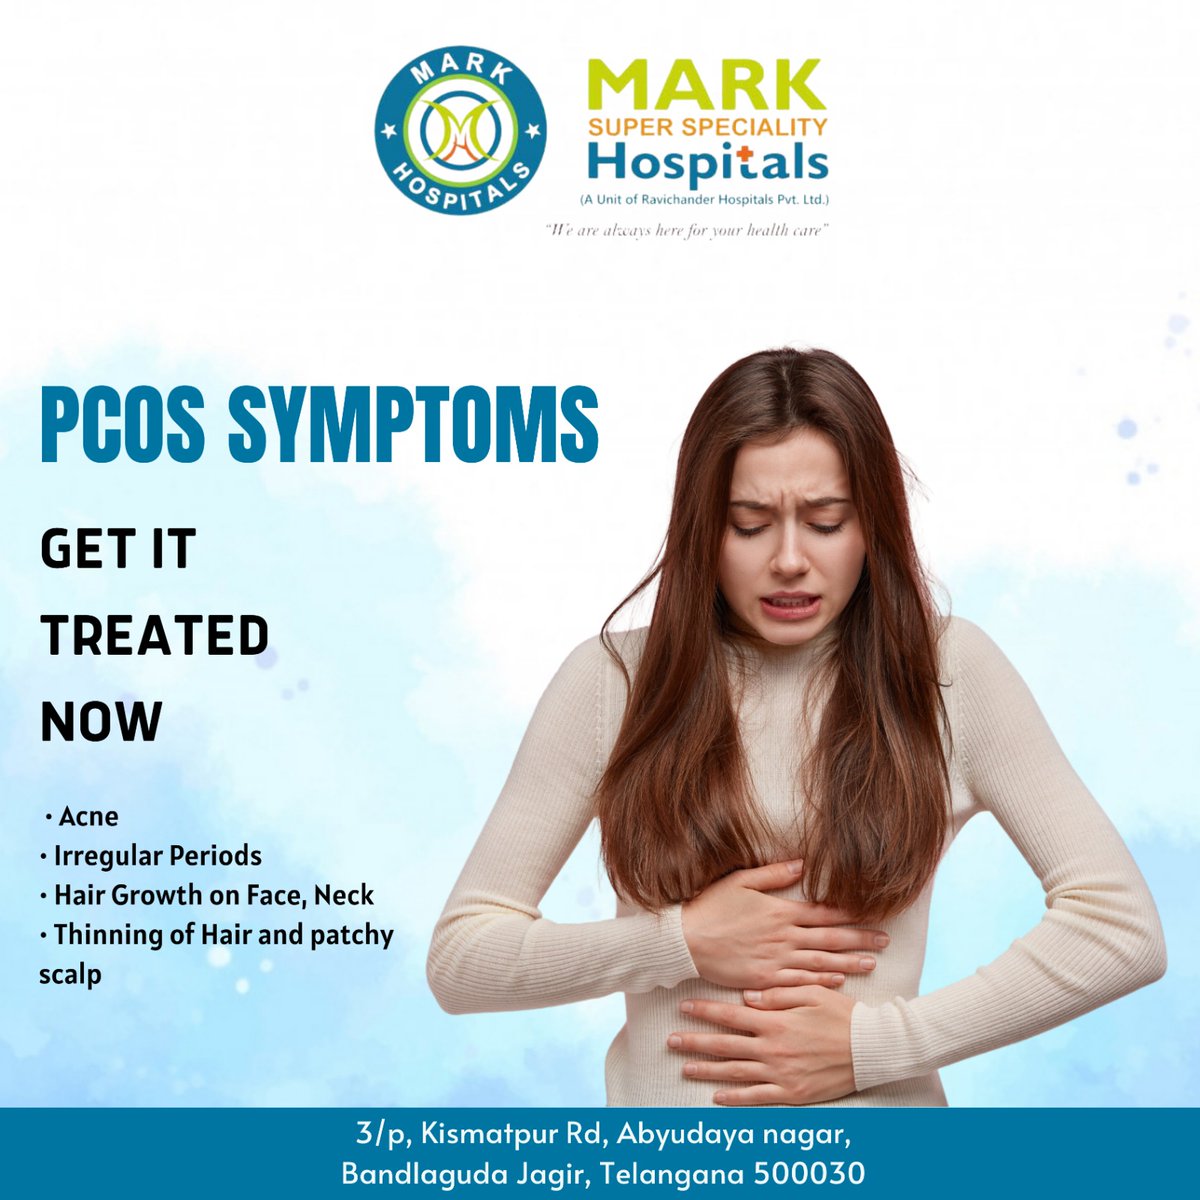 Ladies, it's time to reclaim your health! 💁‍♀️

Polycystic Ovary Syndrome (PCOS) can bring various discomforts like irregular periods, hormonal imbalances, and fertility issues. 
#MarkSuperSpecialtyHospital #PCOS #WomensHealth #HealthCareForHer #FertilityCare #ExpertCare #findapro